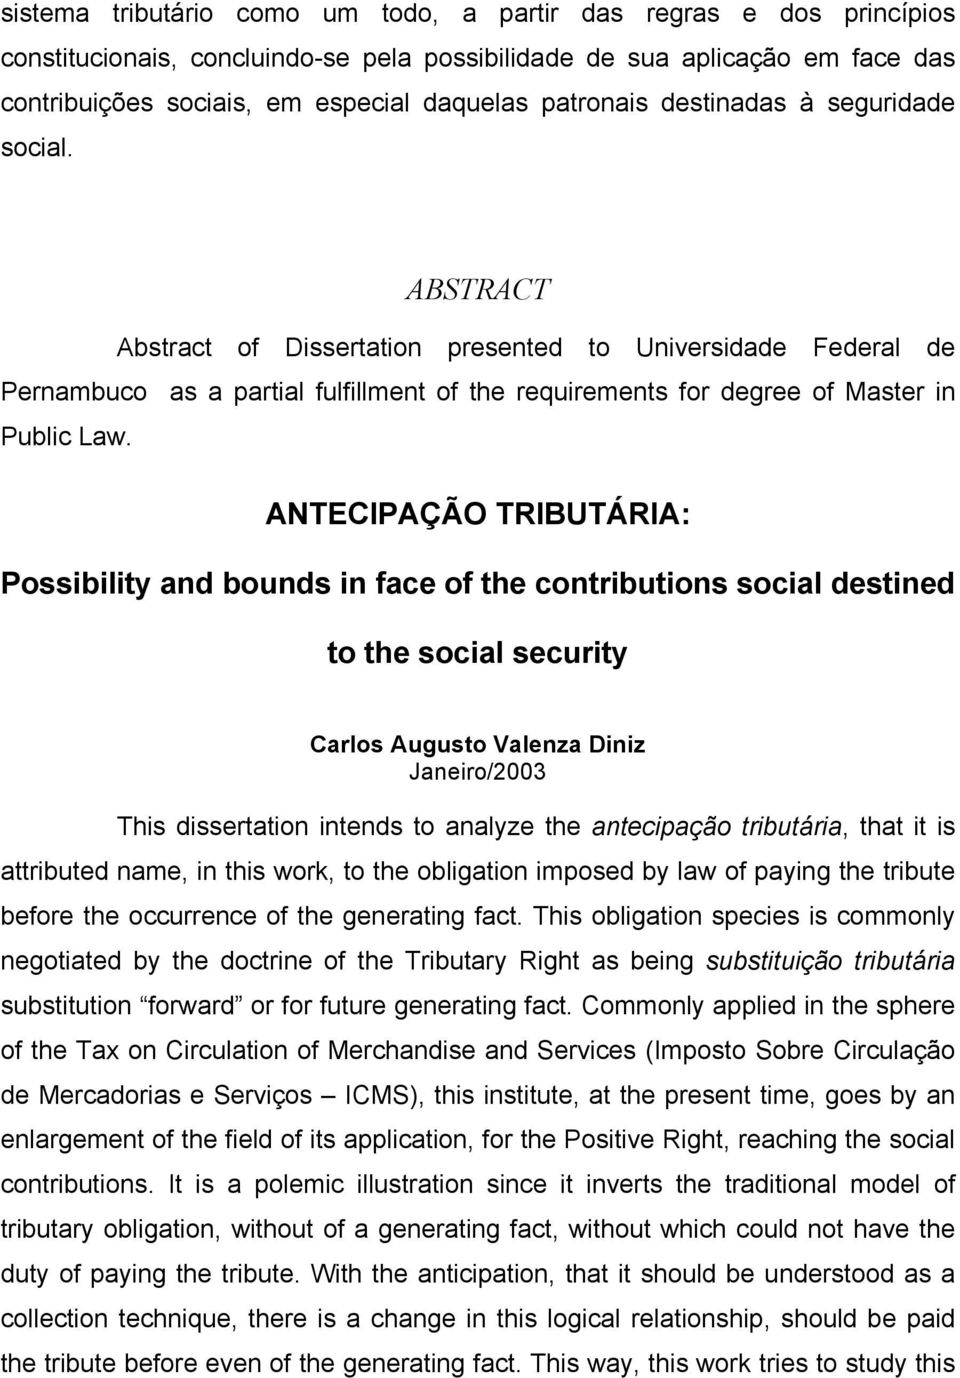 ABSTRACT Abstract of Dissertation presented to Universidade Federal de Pernambuco as a partial fulfillment of the requirements for degree of Master in Public Law.